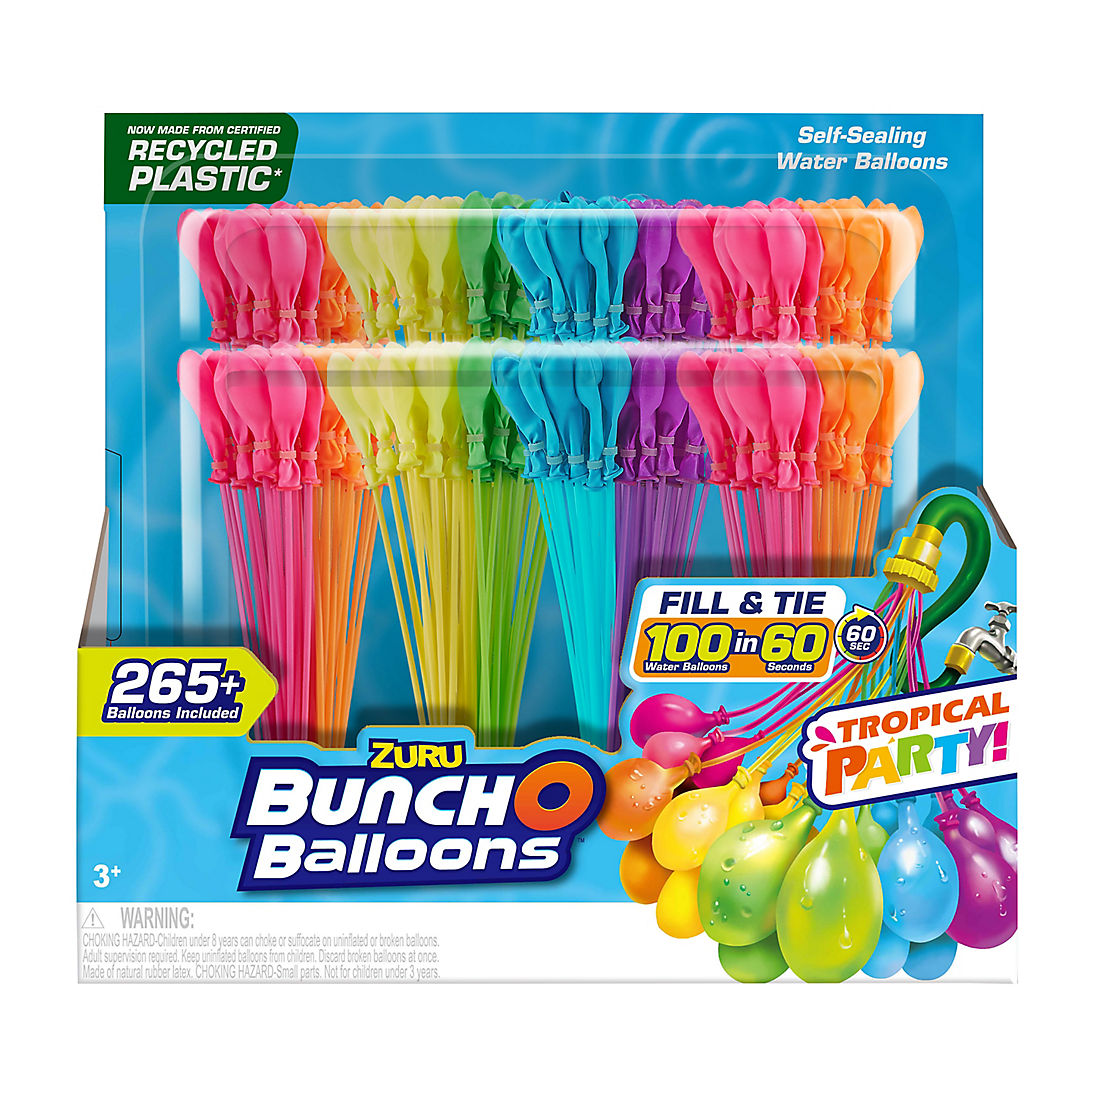 Water Balloons Quick Fill 